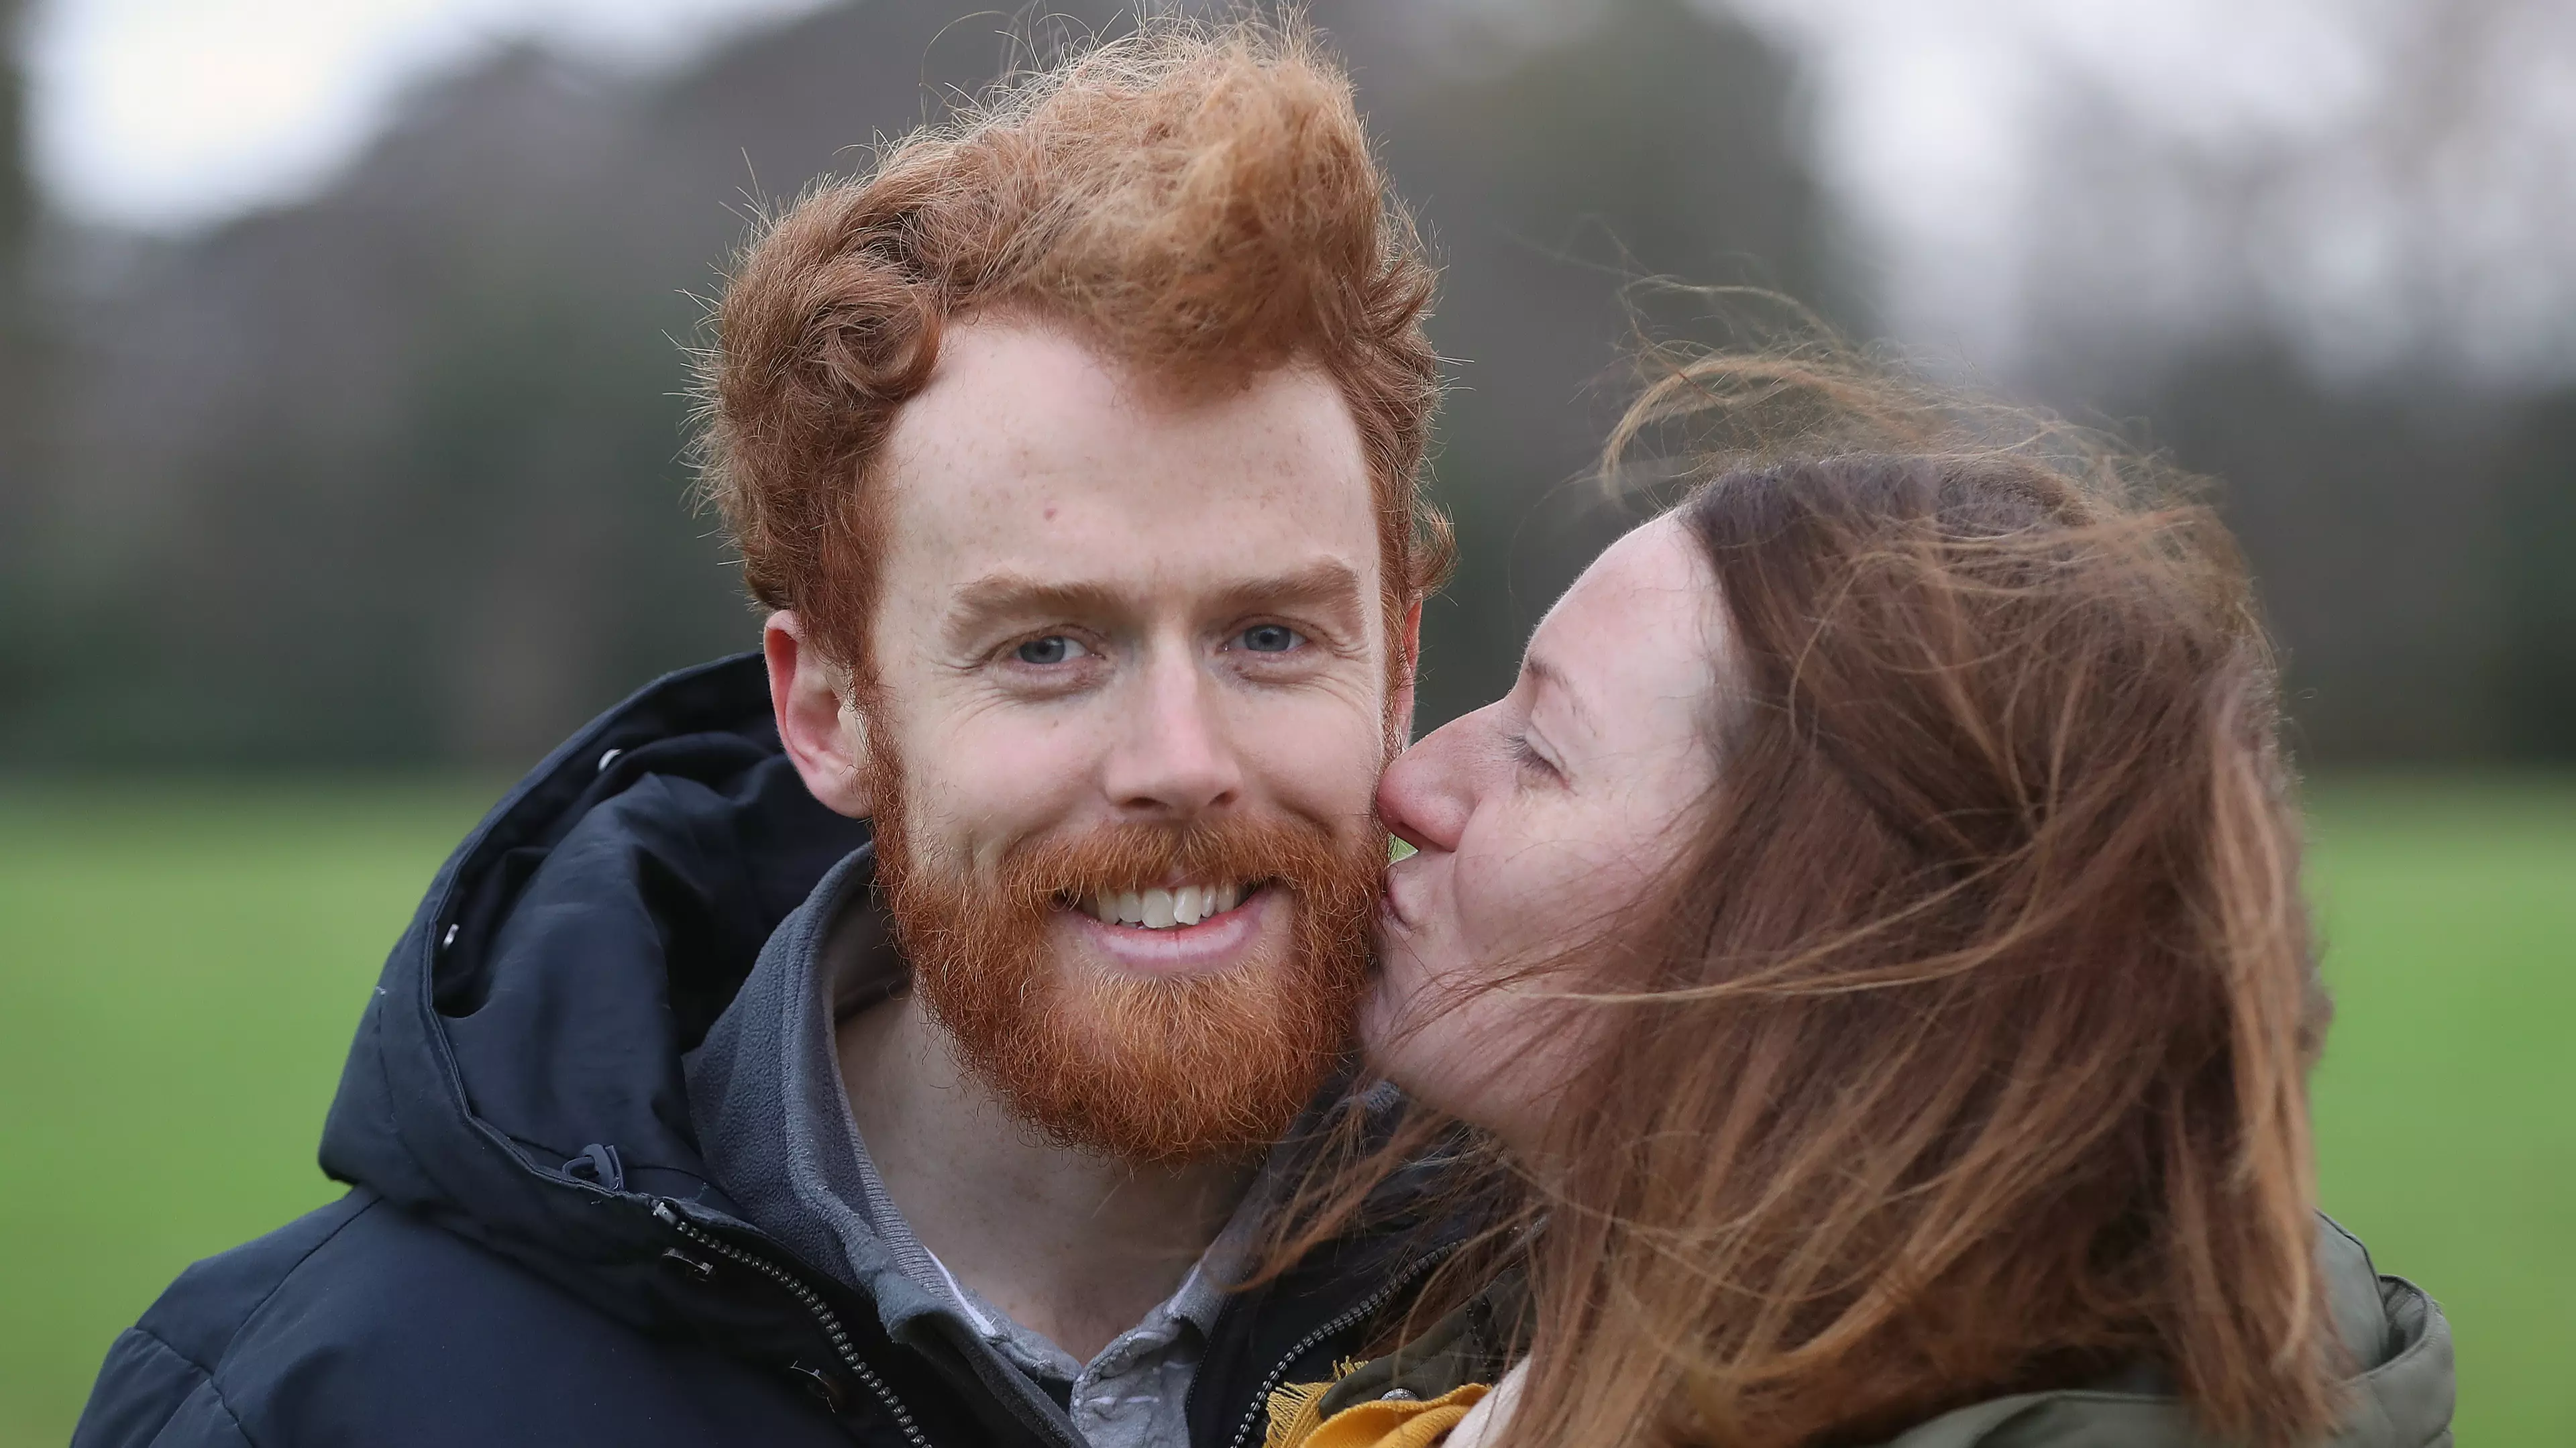 Today Marks The 11th Annual Kiss A Ginger Day